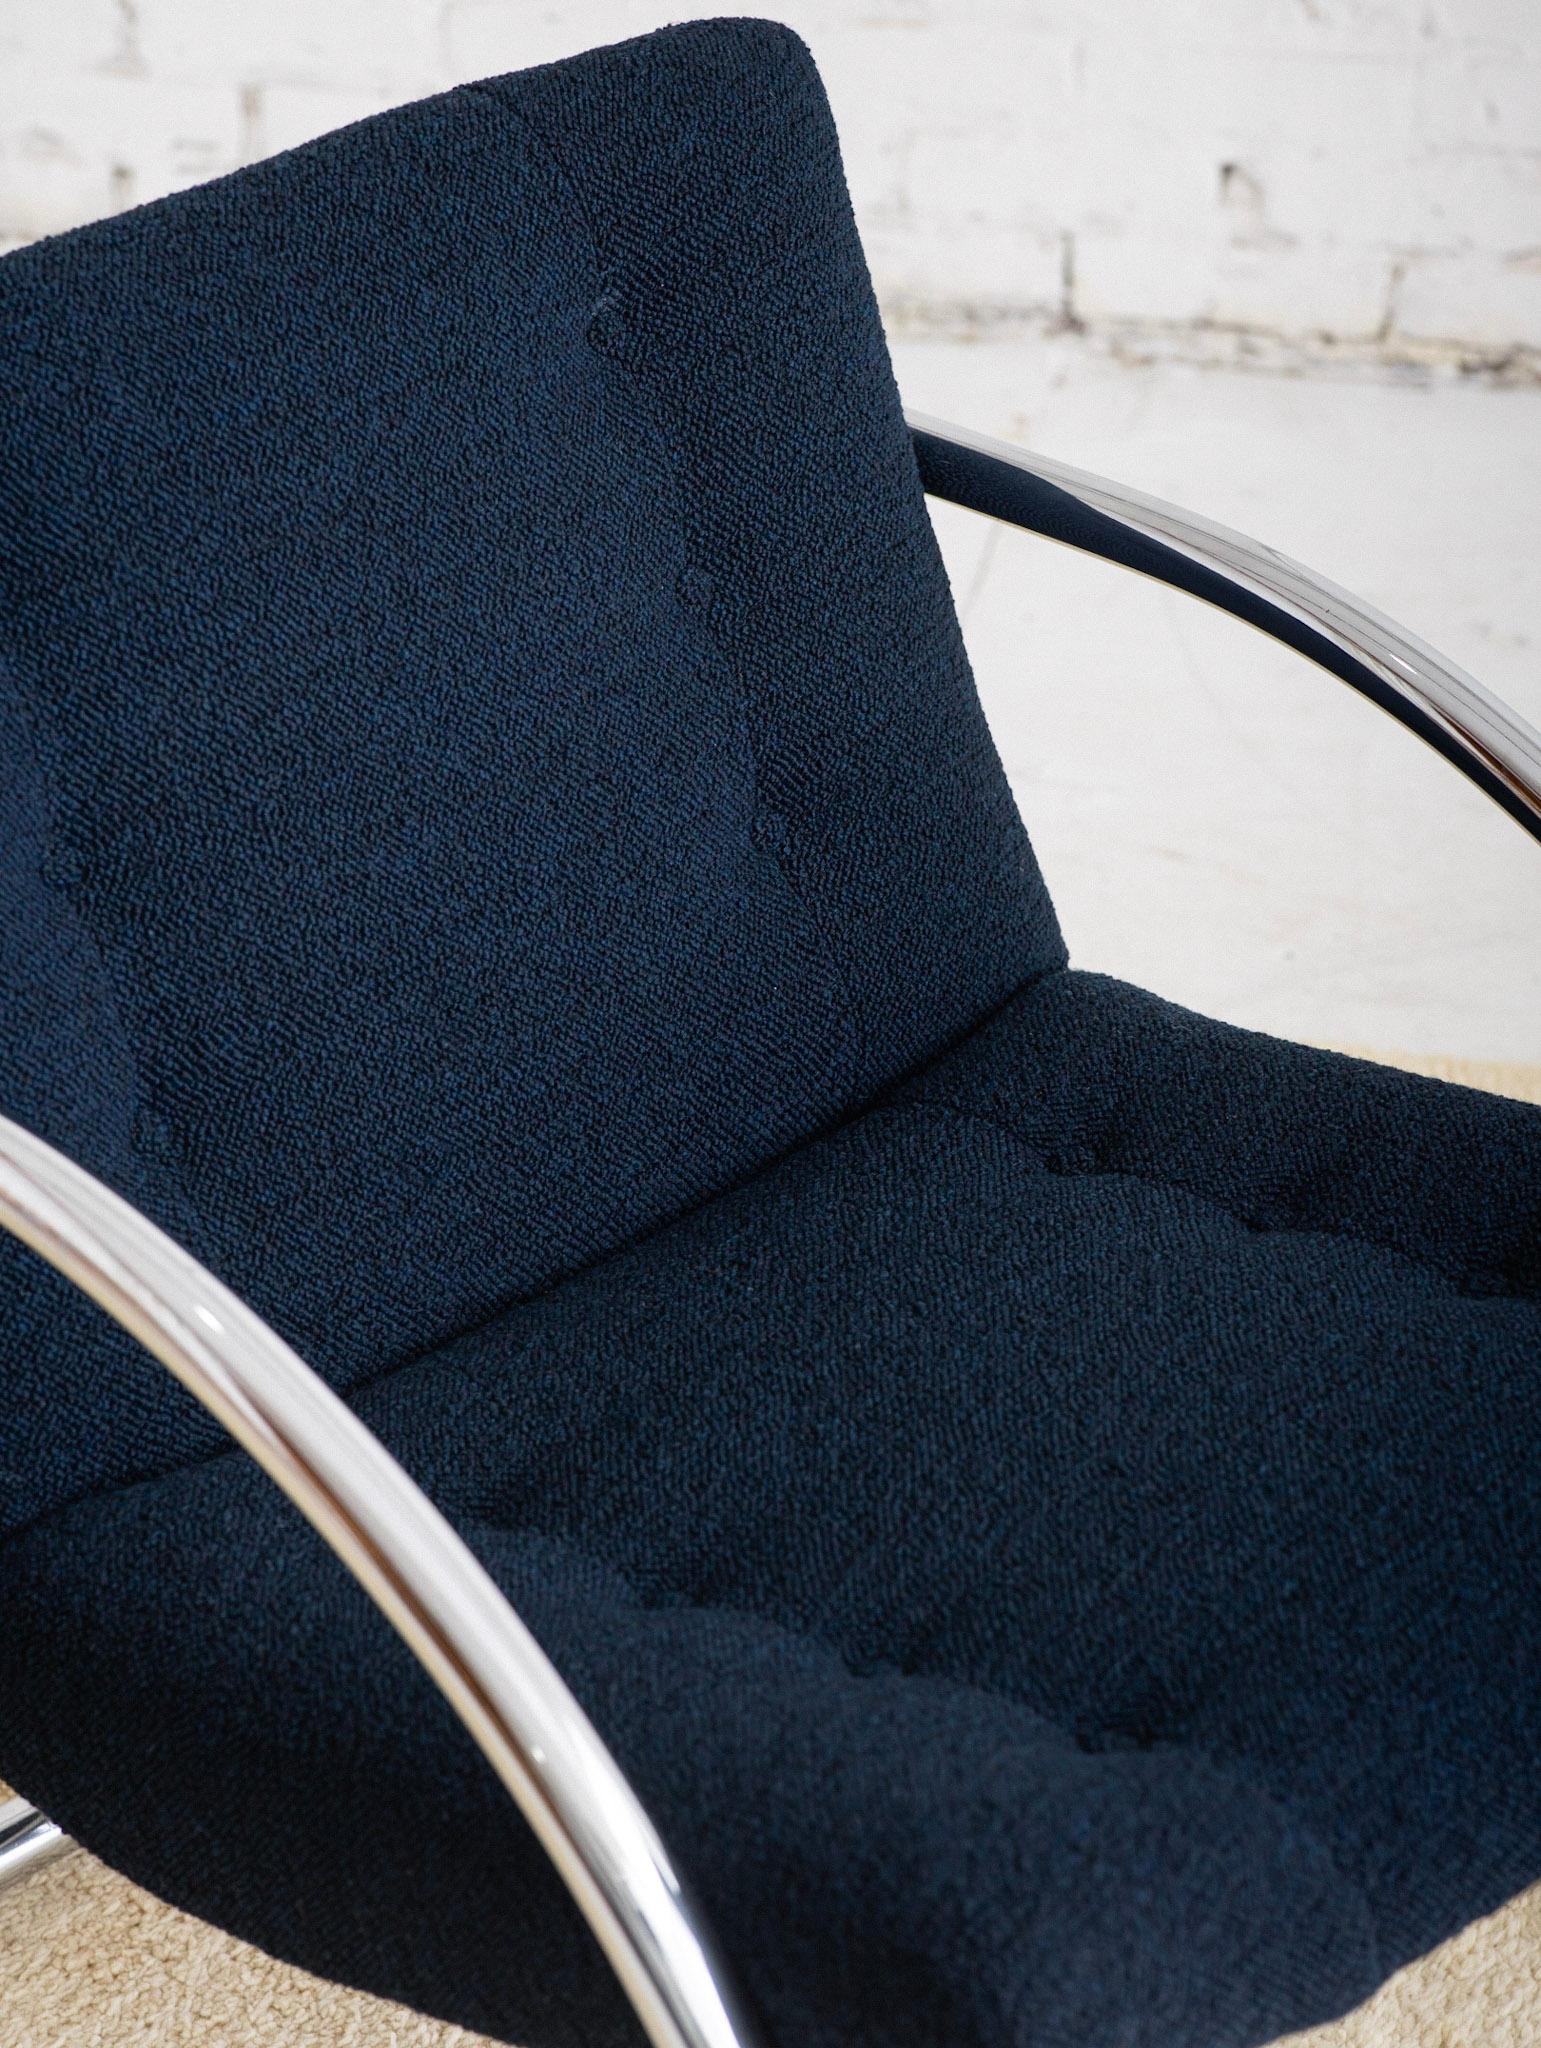 Mid Century Chrome Lounge Chair With Navy Wool Upholstery by Impact 2000 4